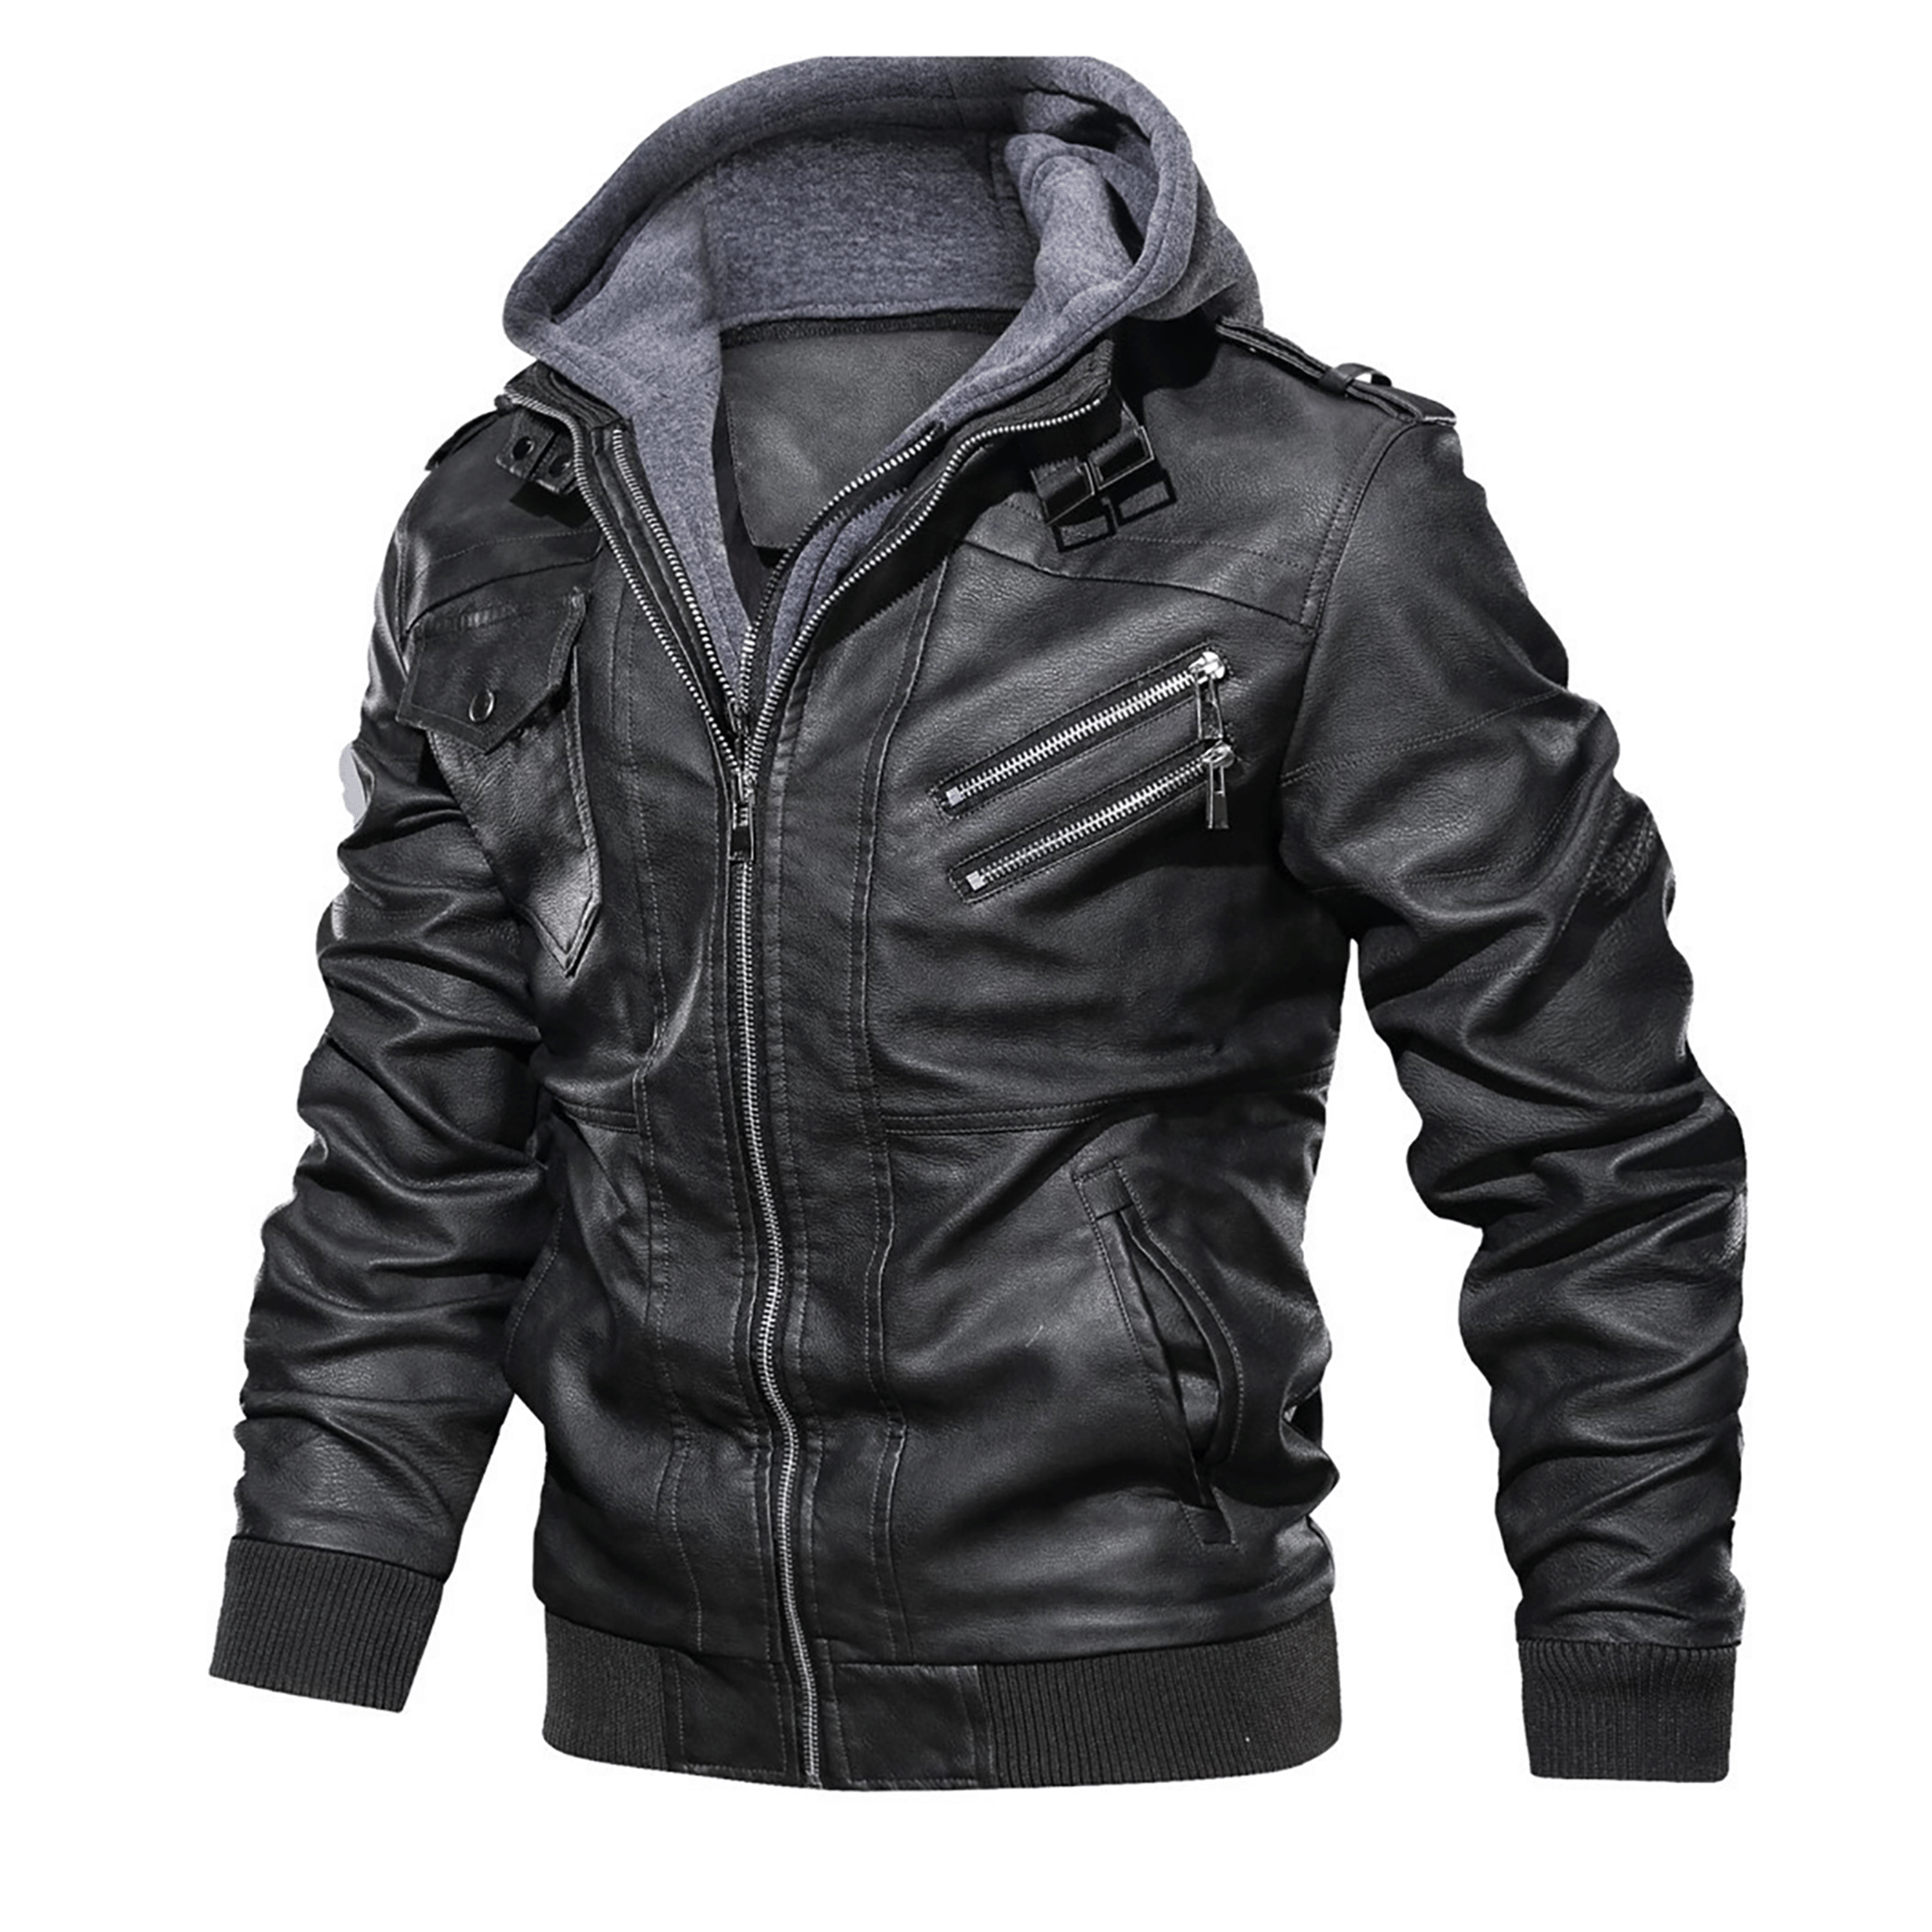 Top leather jackets and latest products 205